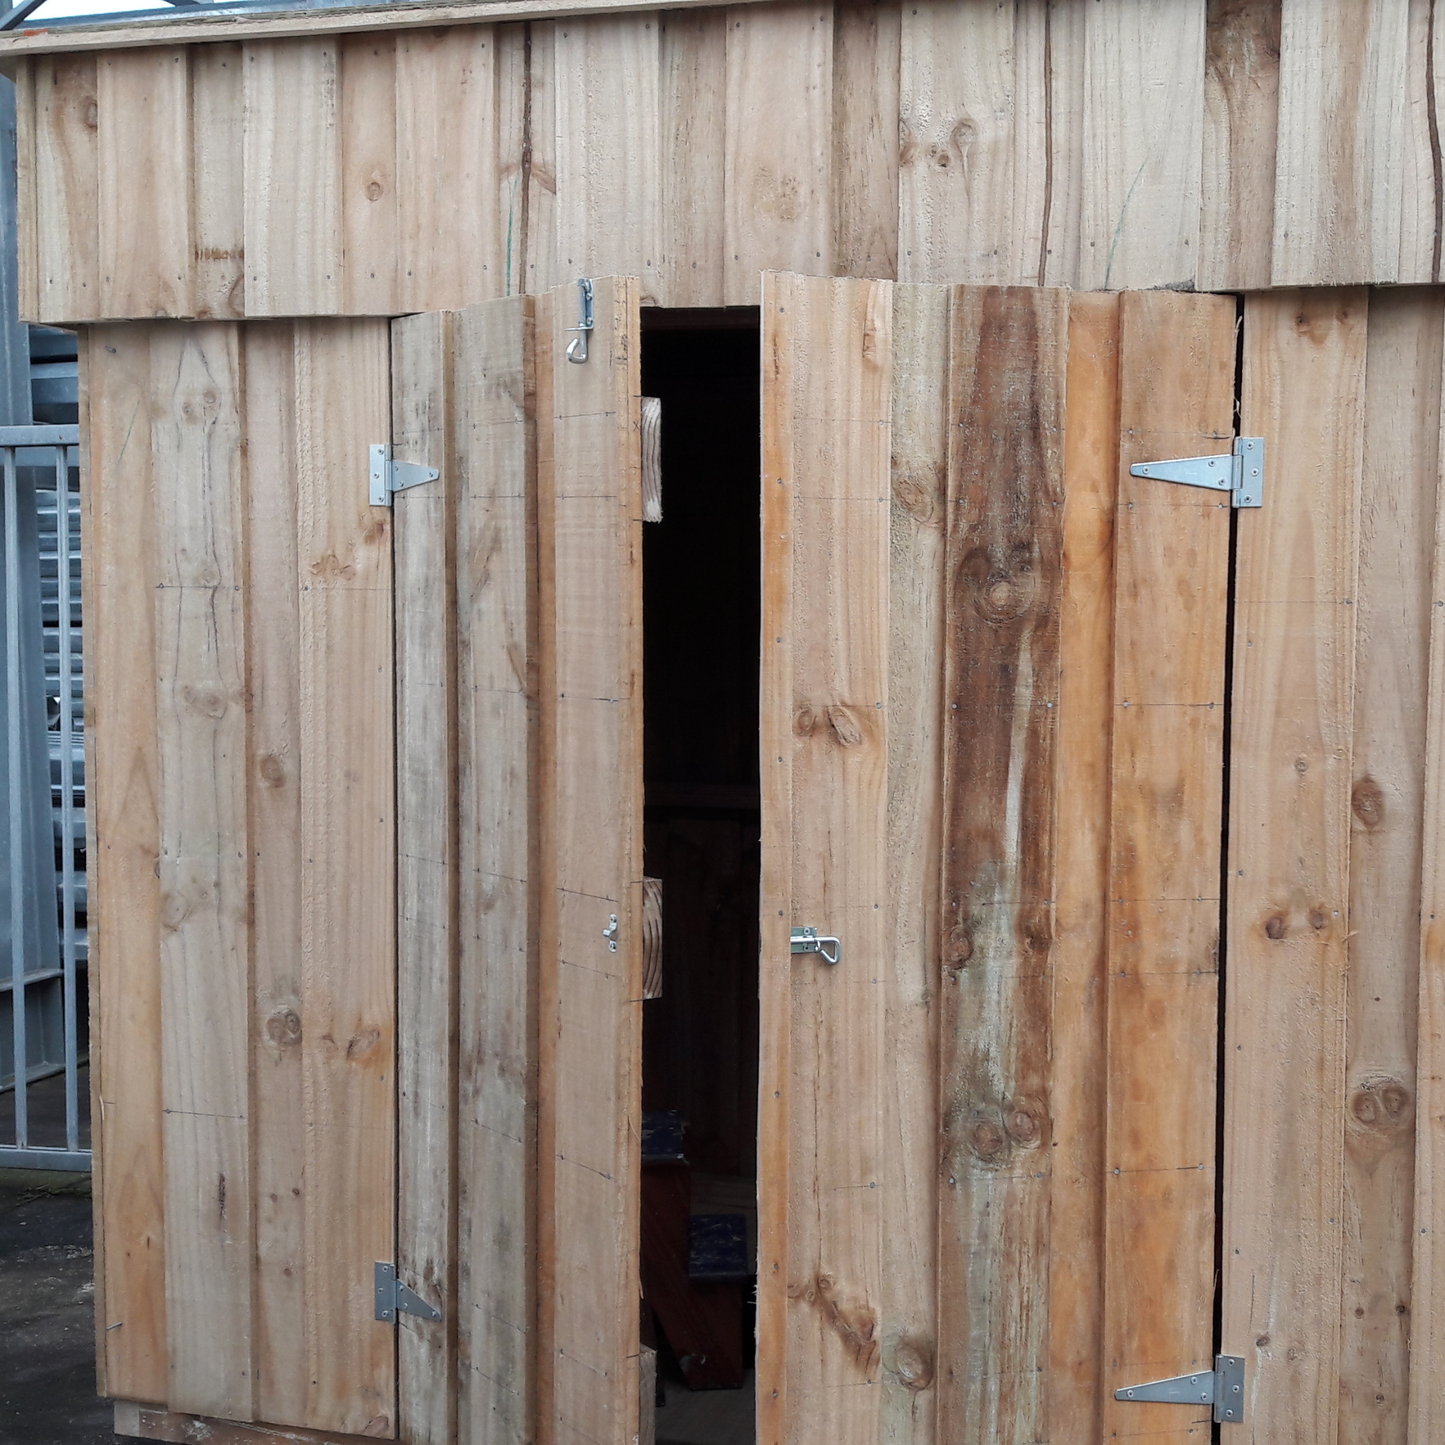 DIY Plans for a 8ft x 4ft (2.4 x 1.2m) wooden shed